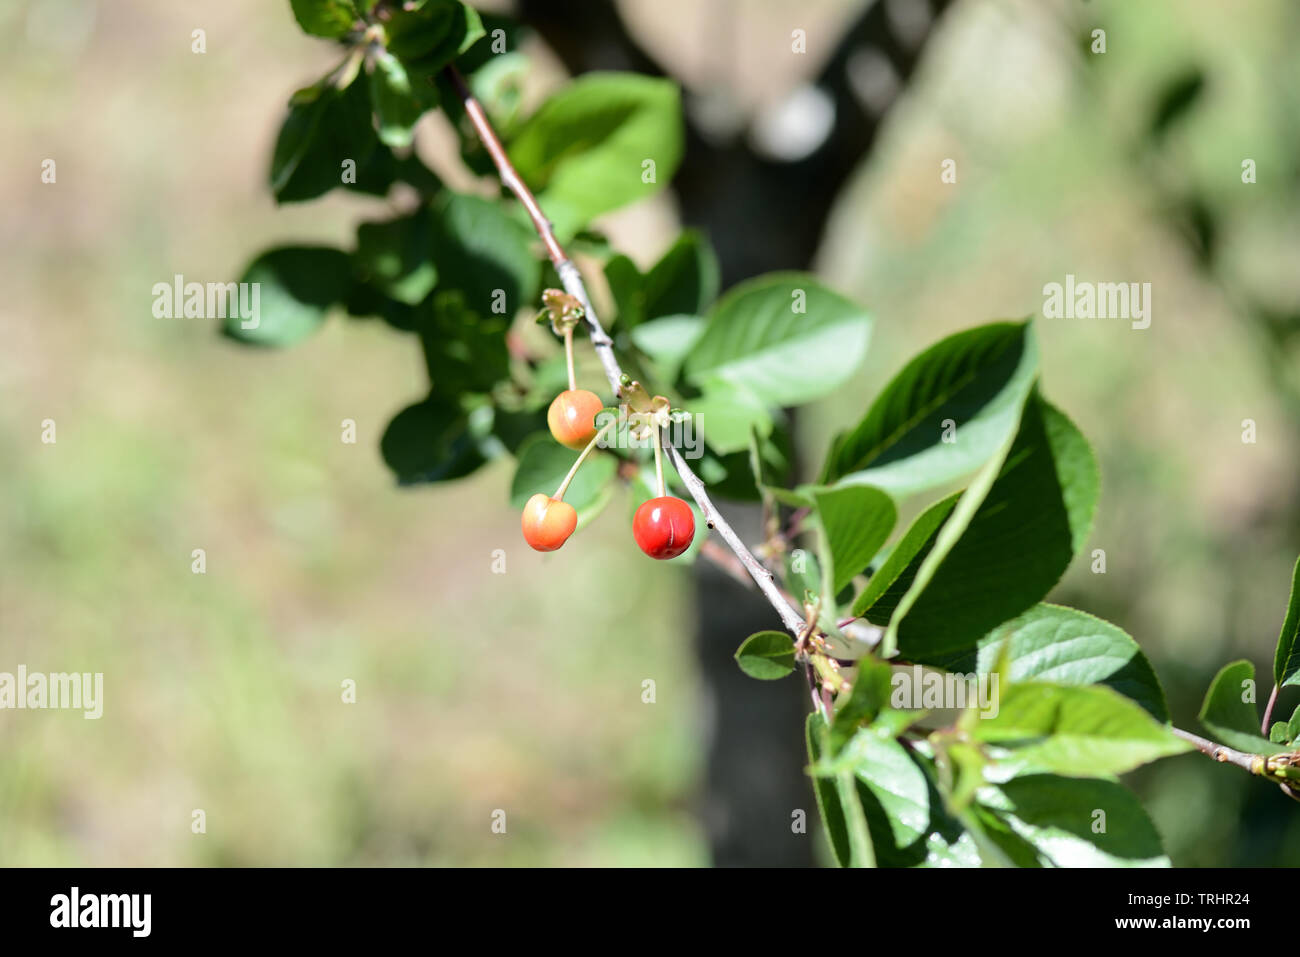 Cherry berries ripen on a tree in the summer garden Stock Photo